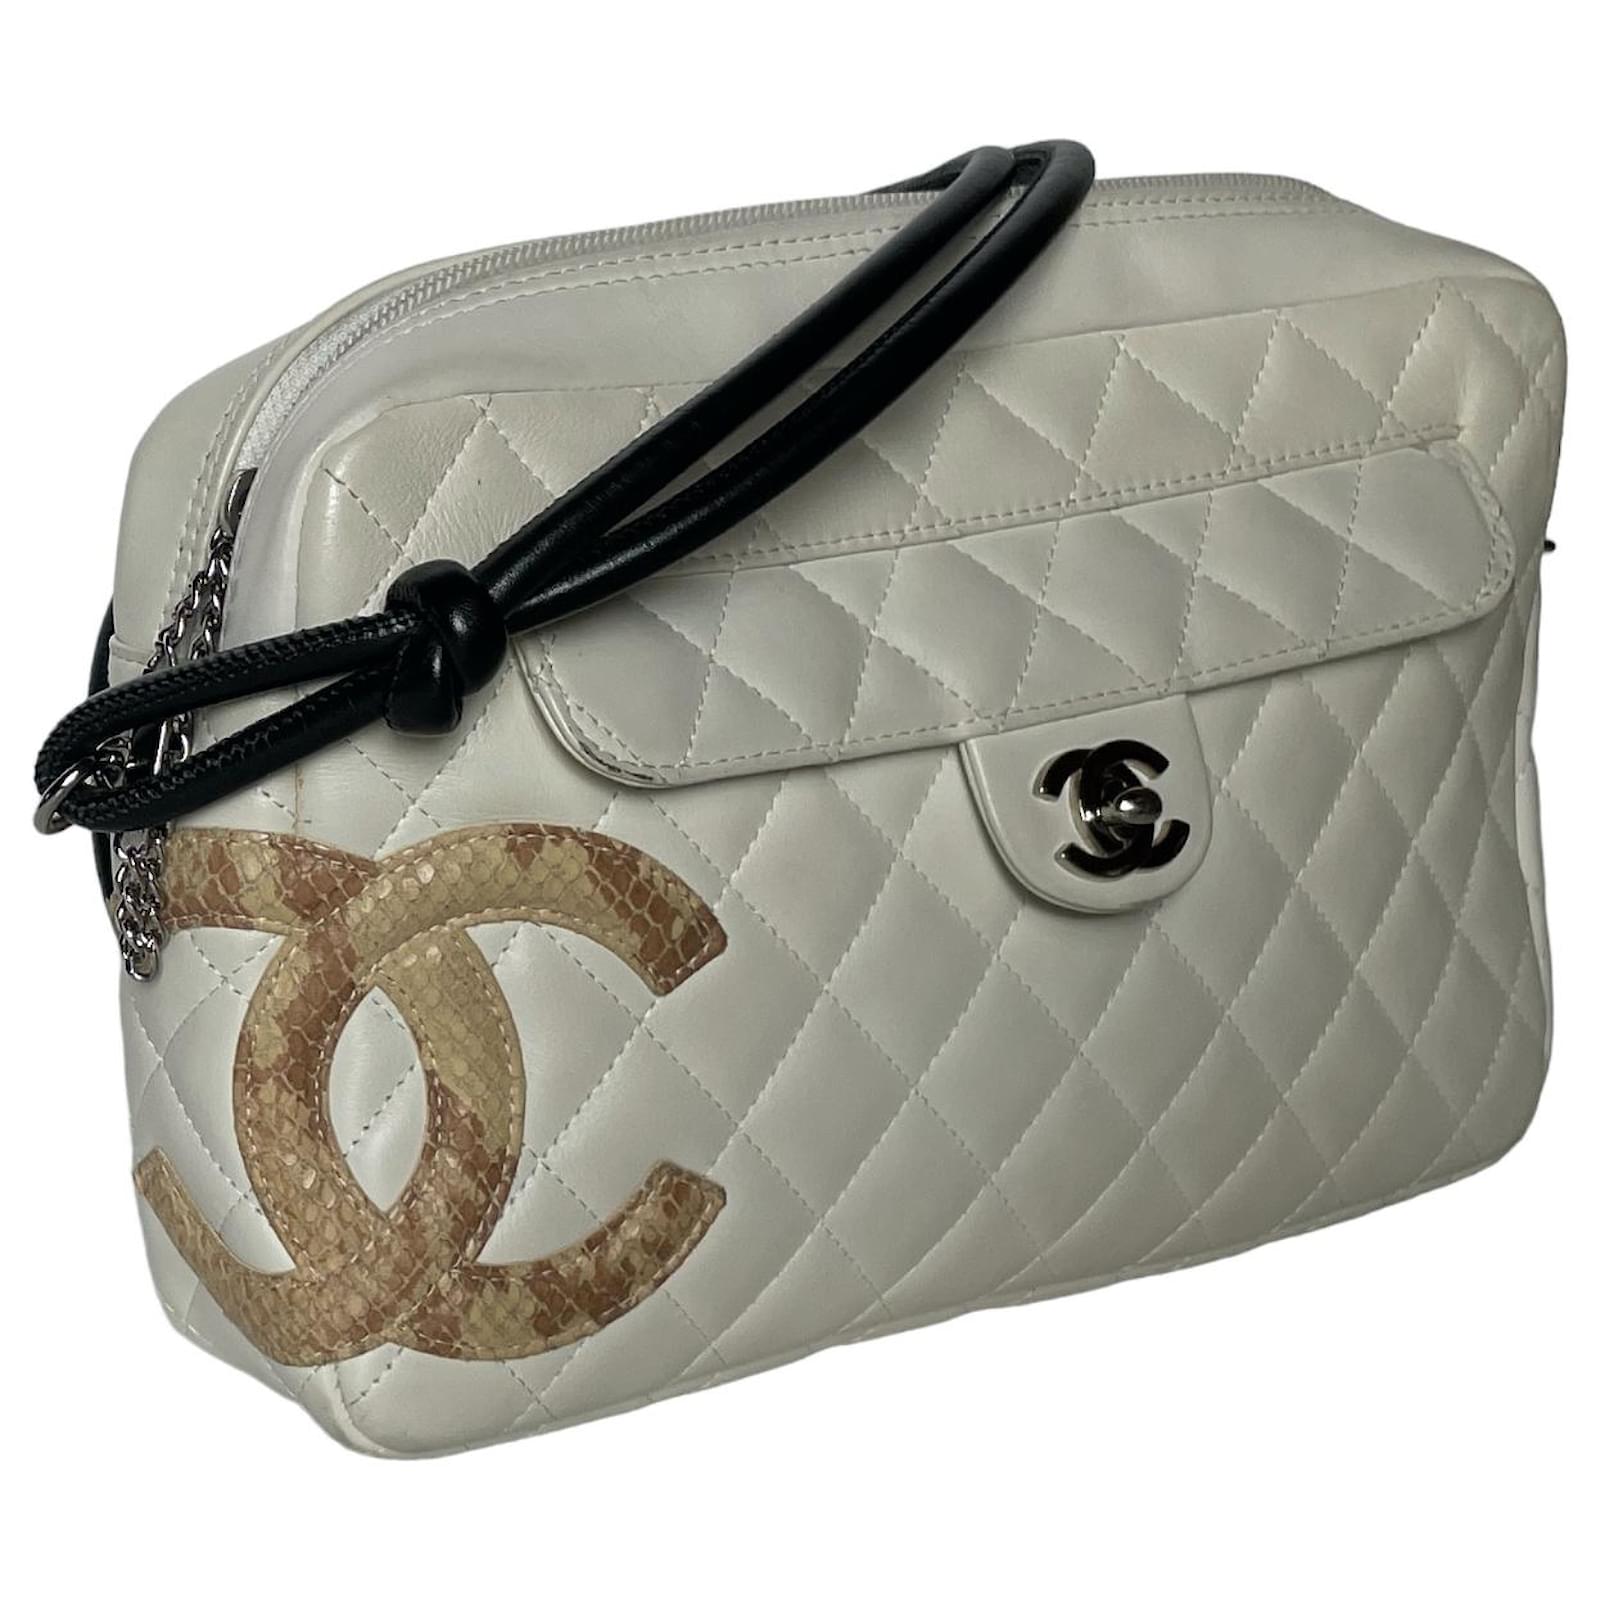 Chanel Cambon Small Rectangle leather handbag - ShopStyle Shoulder Bags